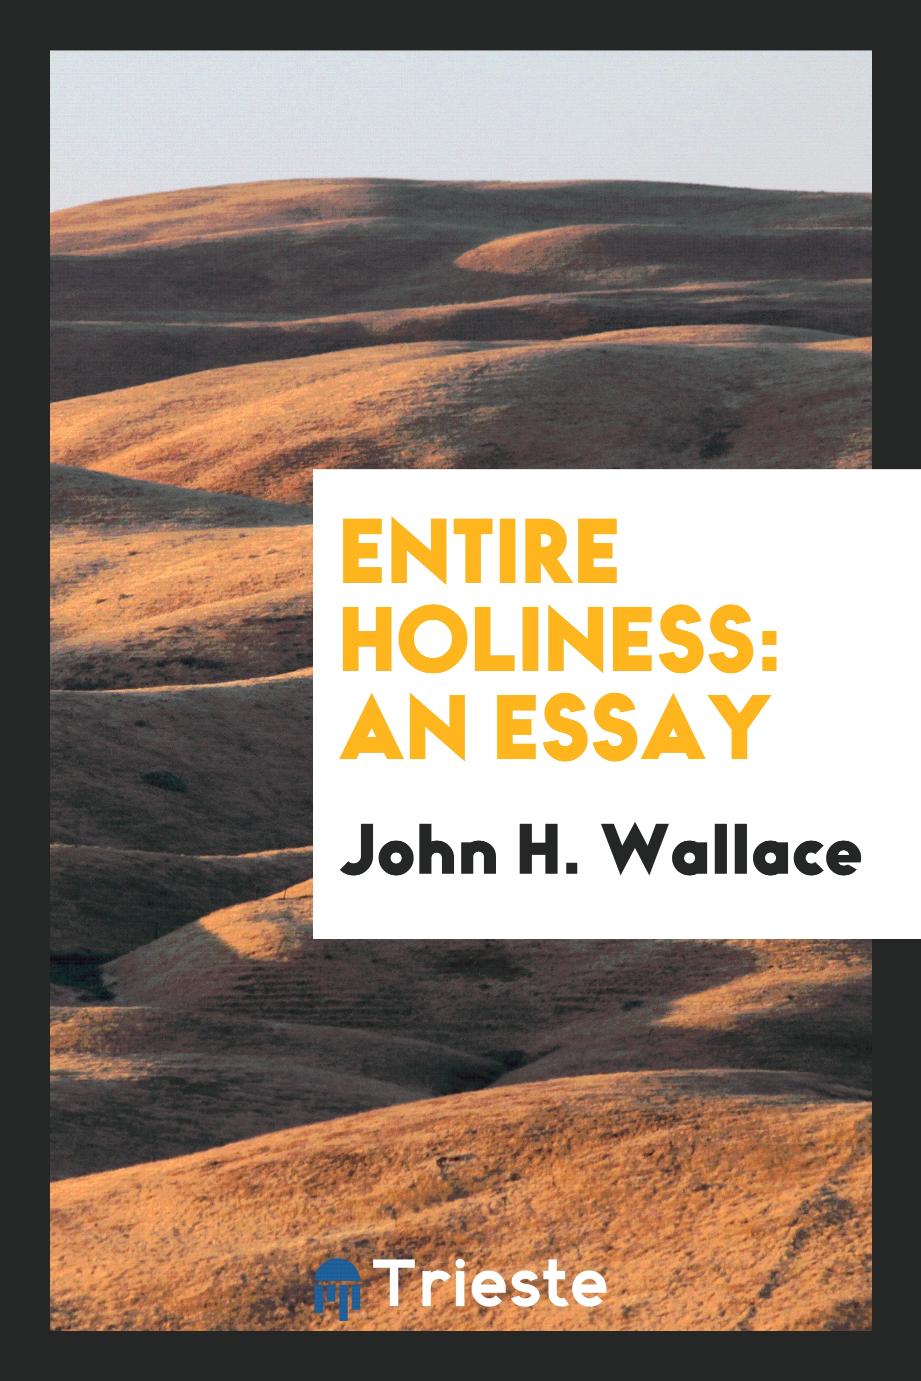 John H. Wallace - Entire Holiness: An Essay